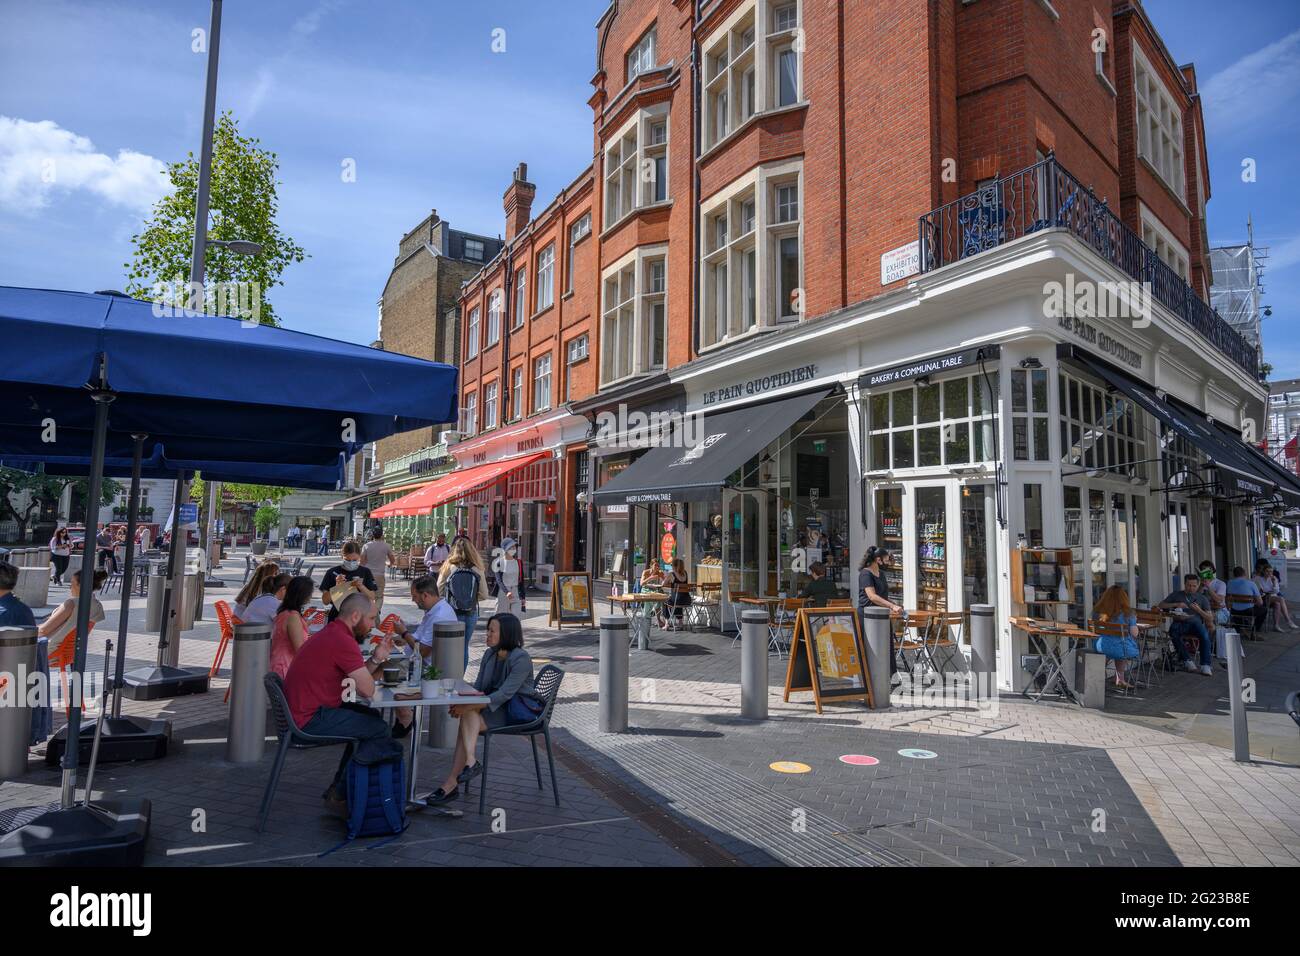 Exhibition Road, London, UK. 8 June 2021. People enjoy outdoor eating on a hot day in London with weather set to continue into the weekend. Credit: Malcolm Park/Alamy Live News. Stock Photo